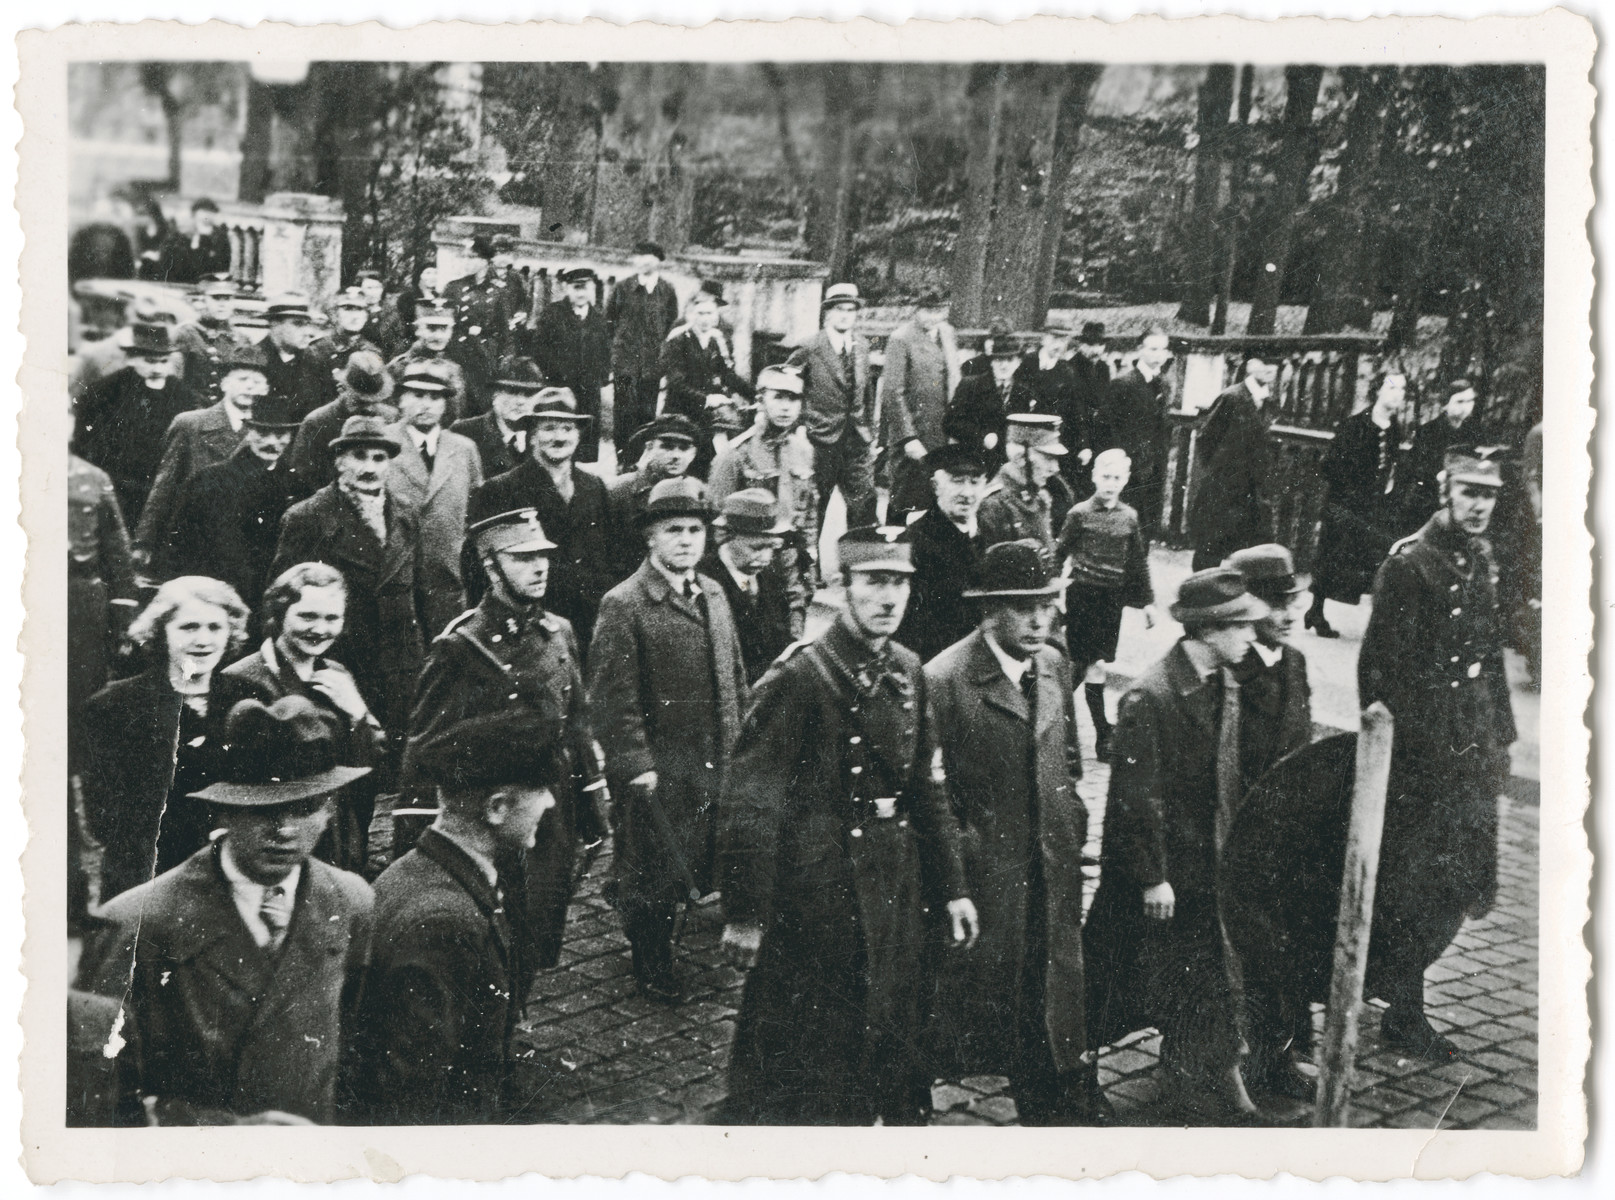 Members of the SA arrest Jewish men from Oldenburg and march them through the streets as bystanders look on.  Among those pictured is the great grandfather of the donor, Adolf Daniel de-Beer.

The orignal caption reads: "SA arrest and transport the Jews of Oldenburg to prison and concentration camp.  Part of a series of ten photographs."